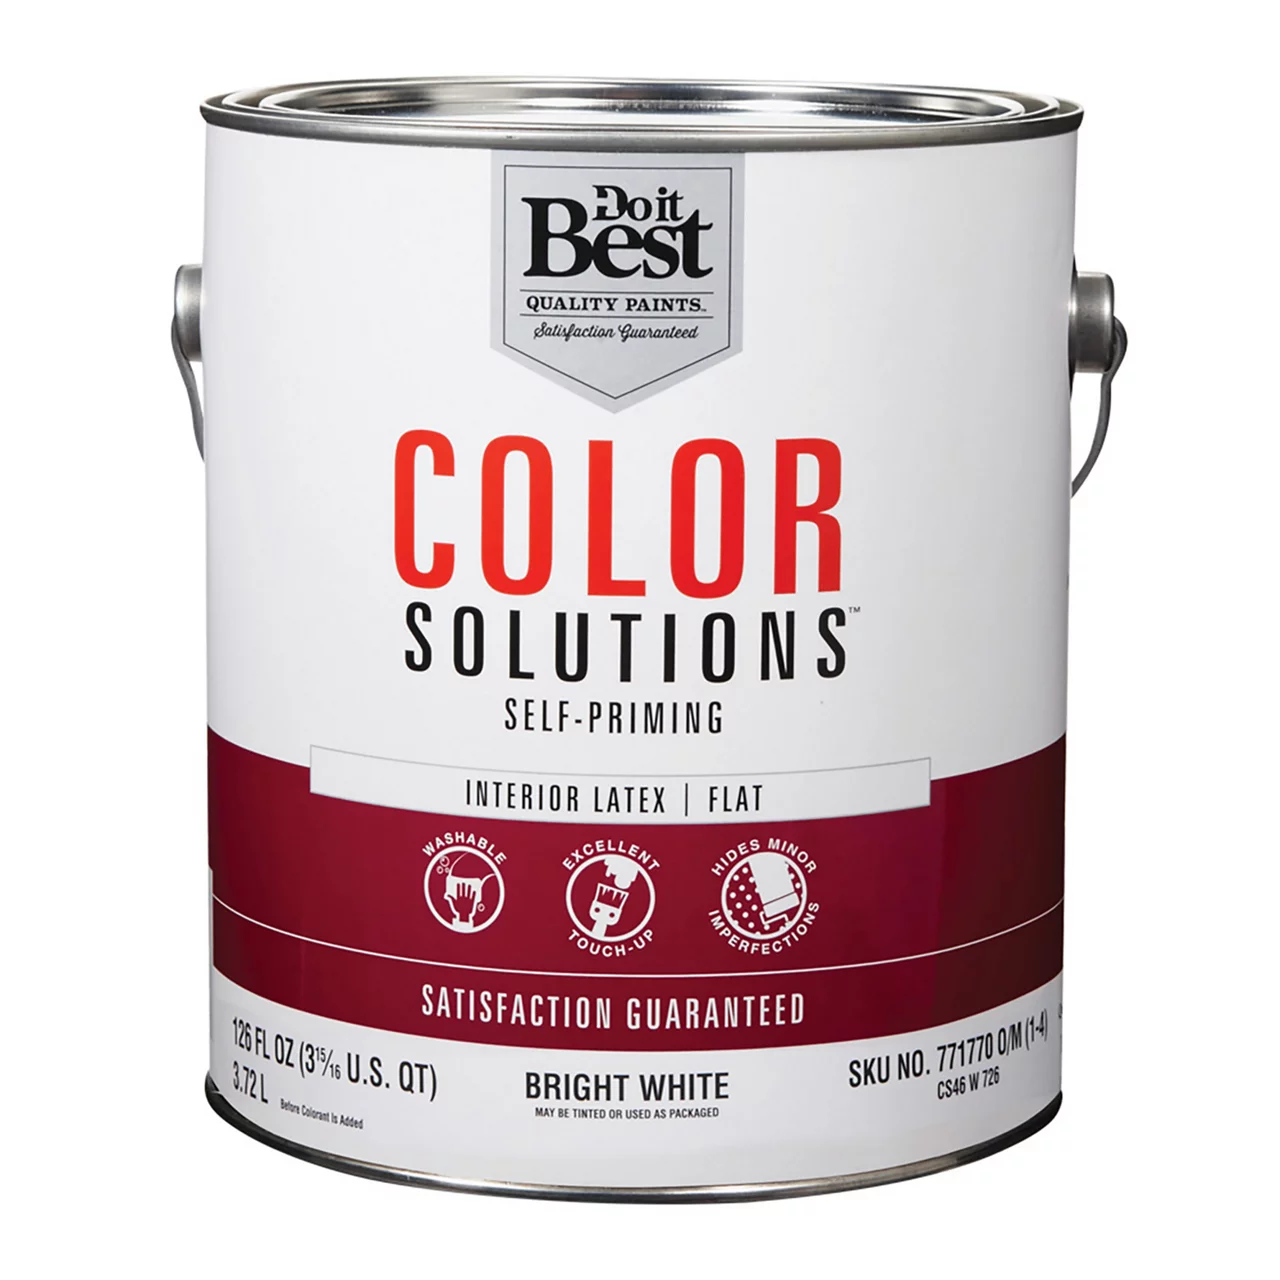 Color Solutions